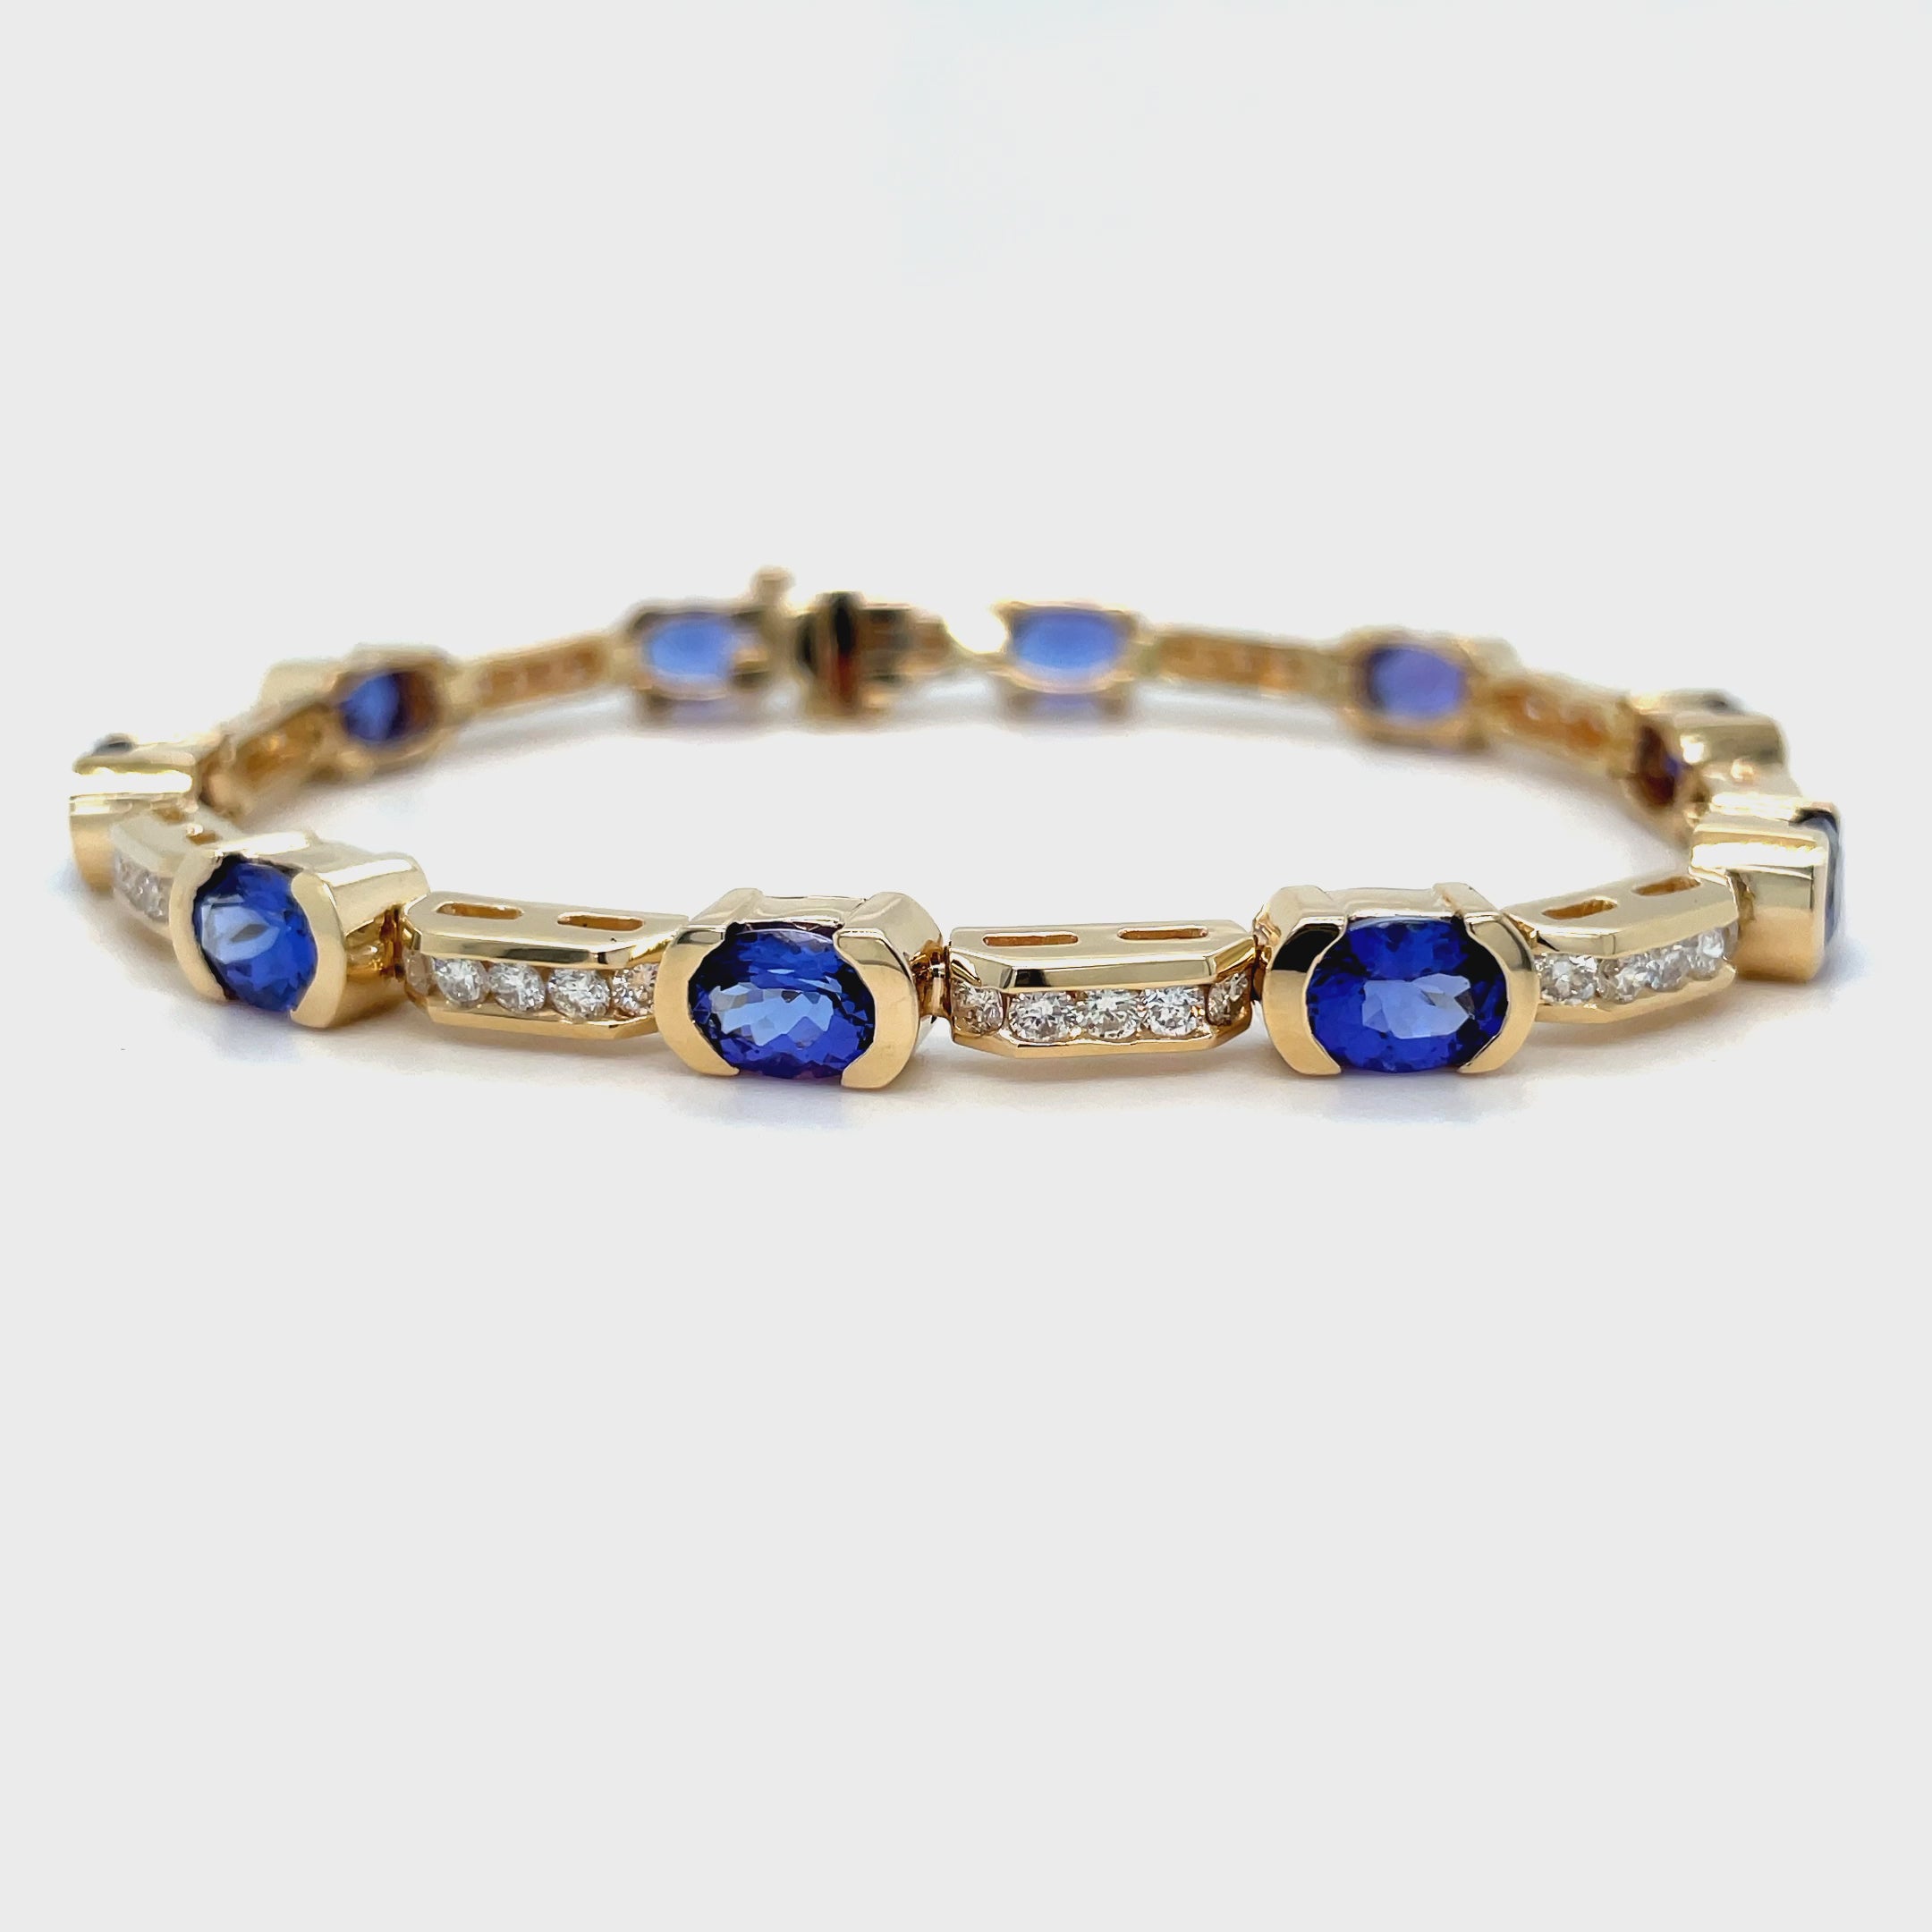 Experience the elegance and glamour of our Fine Diamond & Tanzanite Oval Shape Bracelet. Crafted from 14k yellow gold, this one-of-a-kind bracelet features smooth movement, a hidden clasp, and a stunning combination of oval shape rubies (8.50 cts) and round diamonds (2.00 cts). Impress with 7 inches of pure luxury